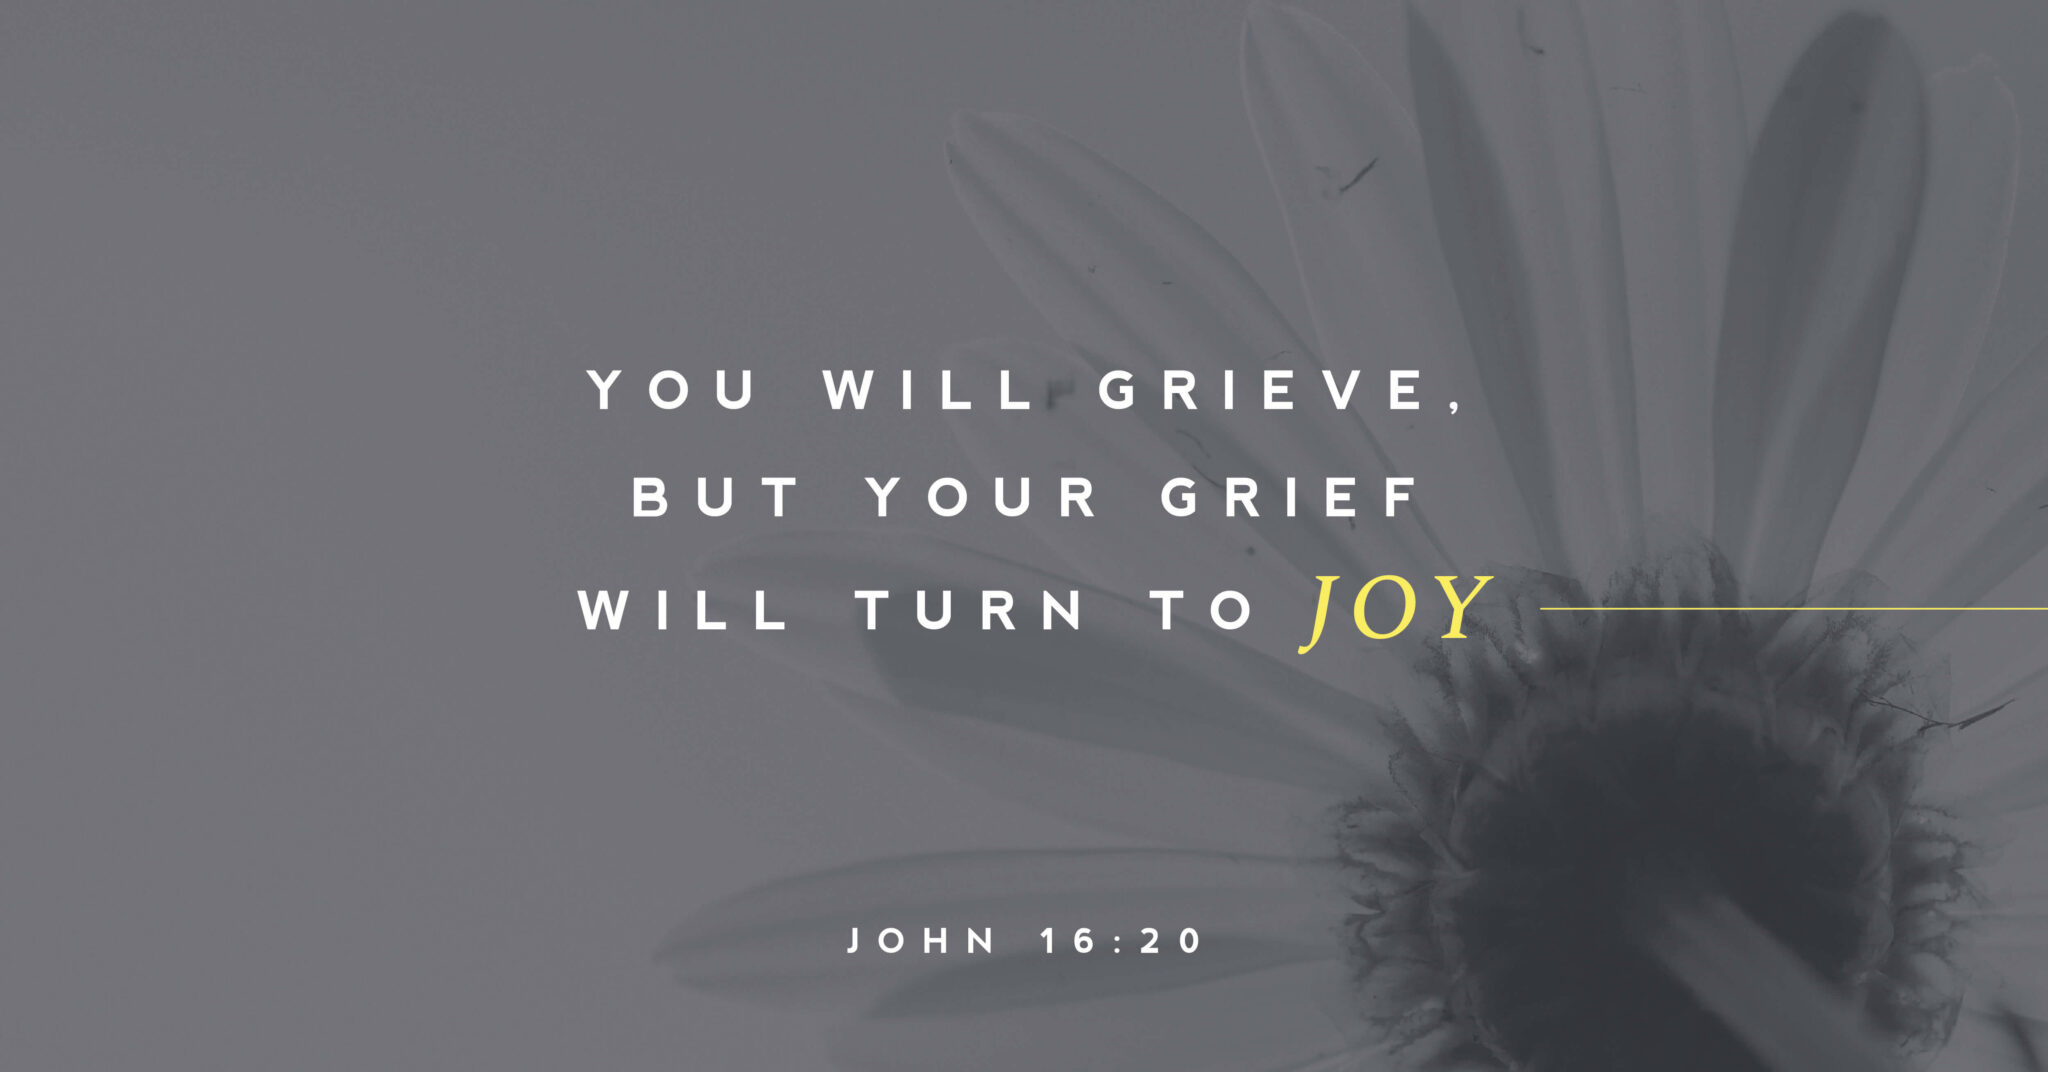 A picture of a daisy with text overtop that reads "You will grive, but your grief will turn to joy" (John 16:20).